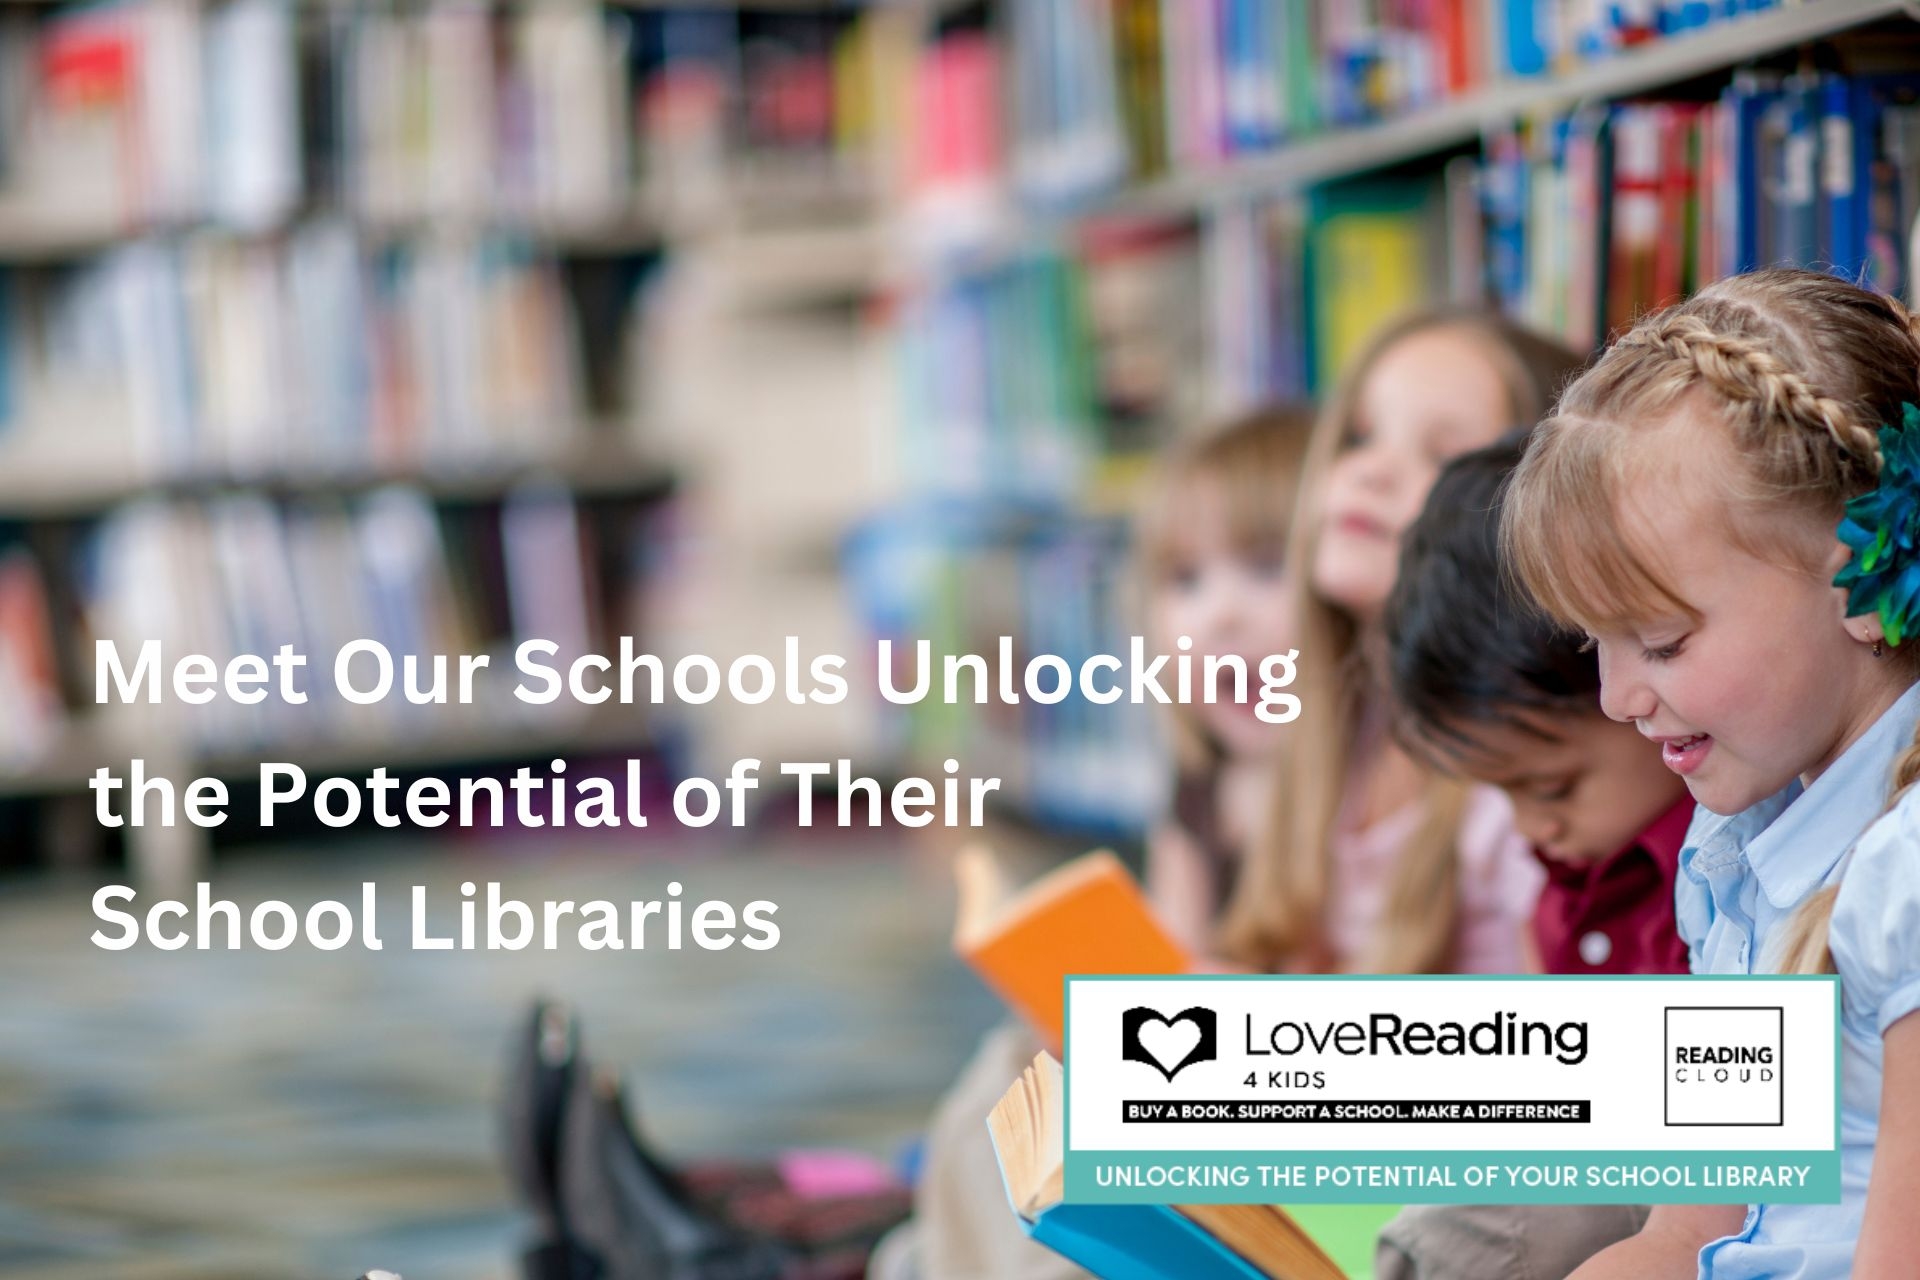 LoveReading4Kids x Reading Cloud Initiative - Meet Our Schools Unlocking the Potential of Their School Libraries